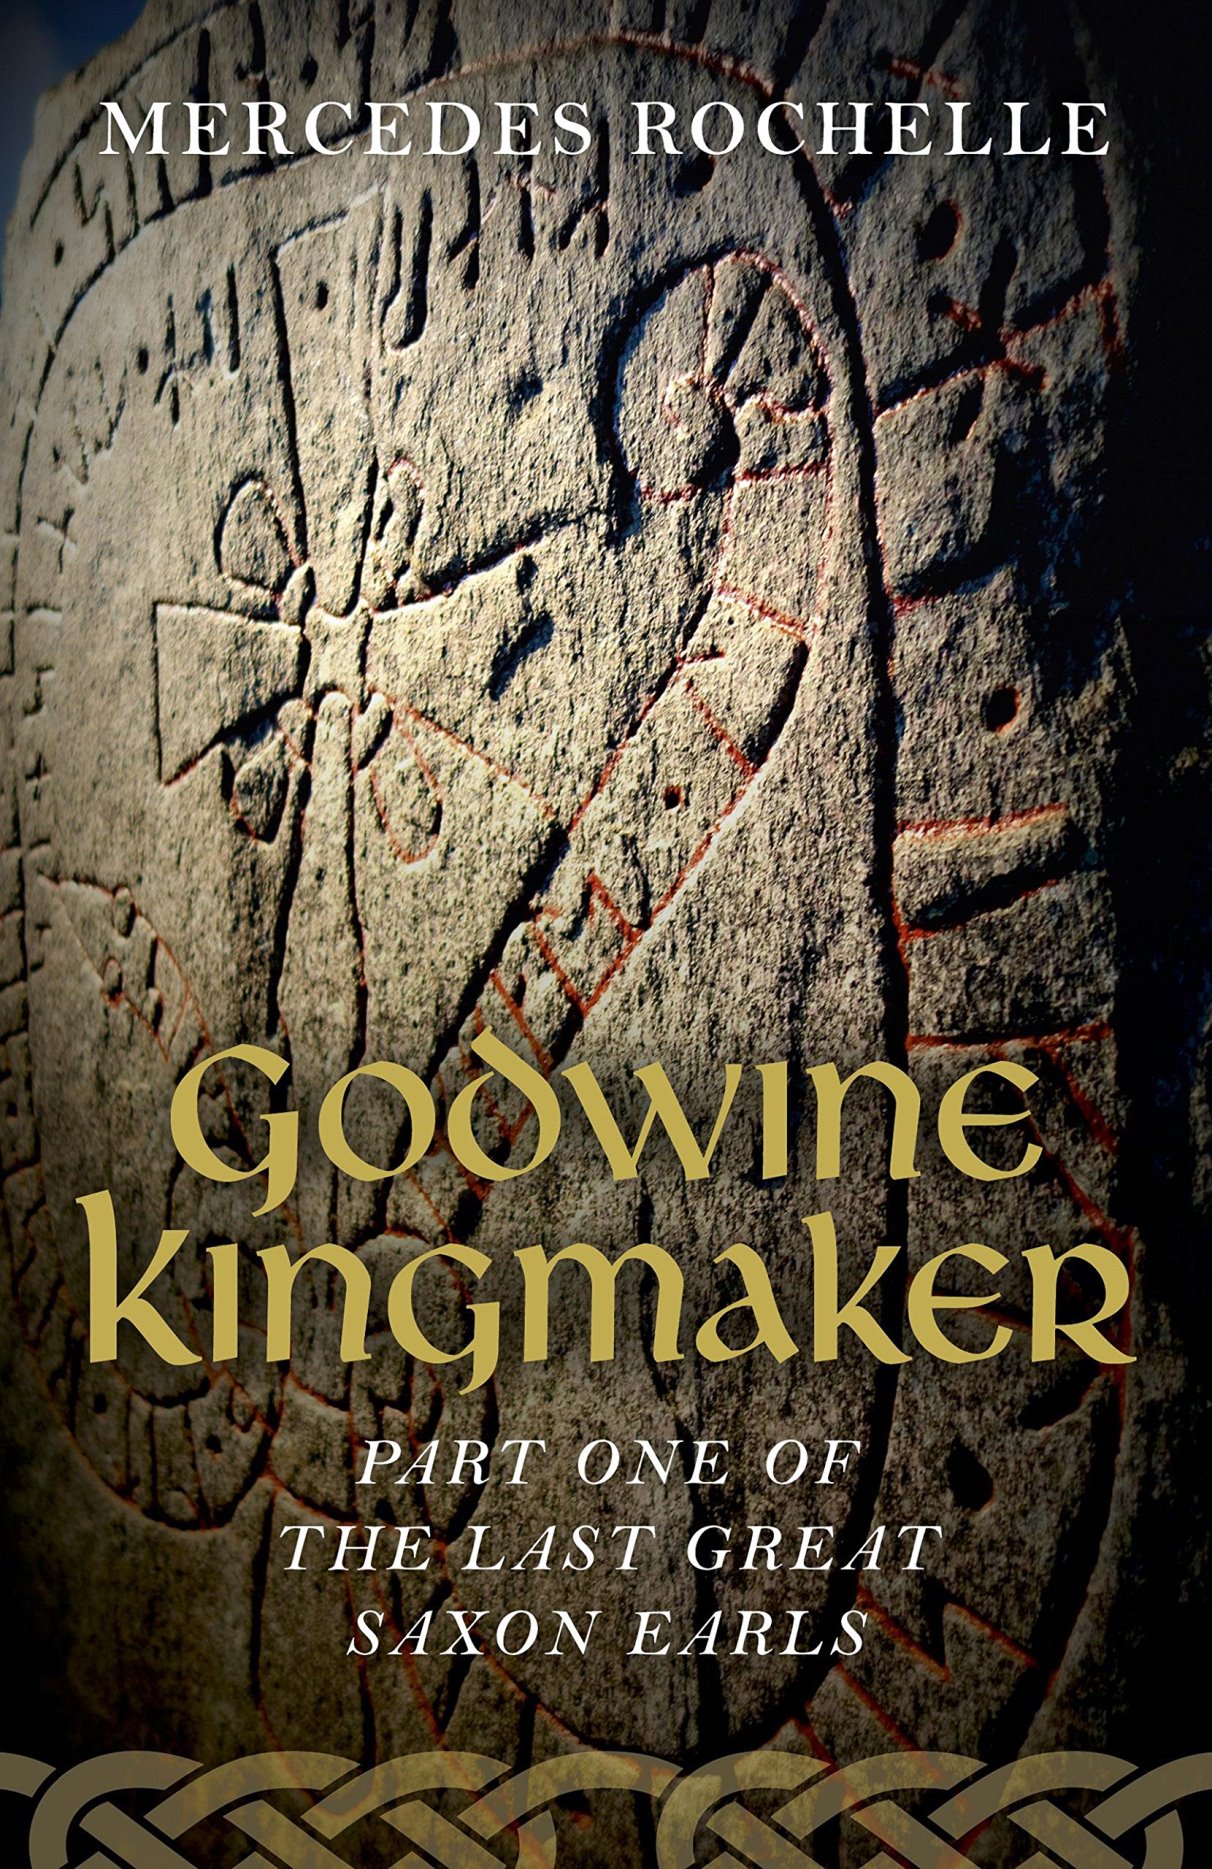 Godwine Kingmaker by Mercedes Rochelle – Blog Tour and Book Review